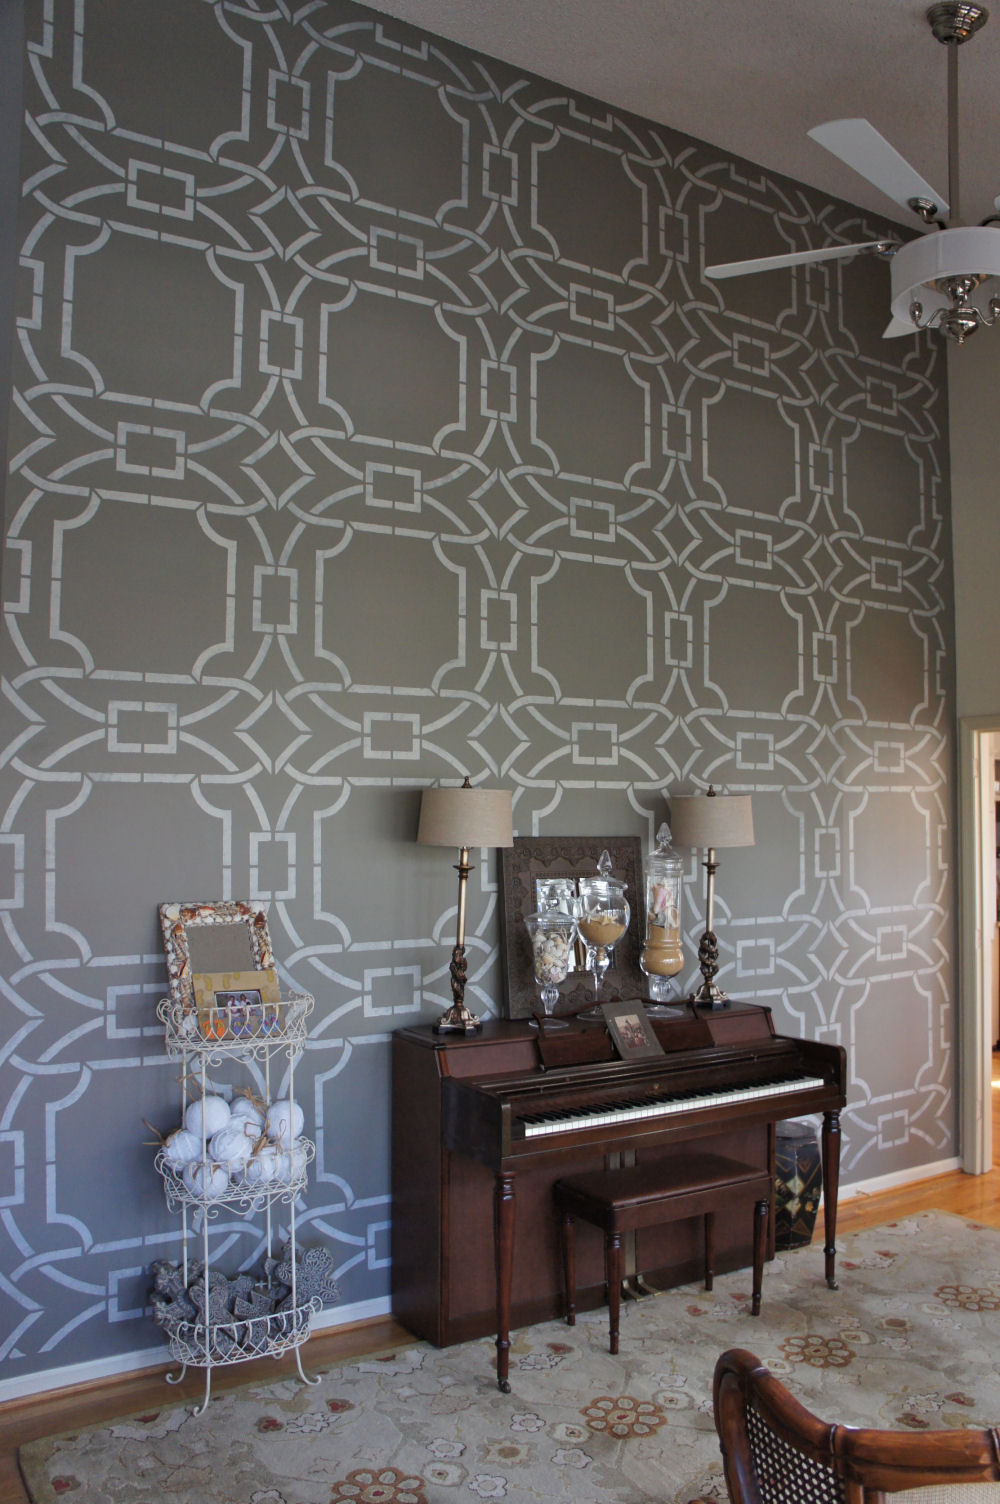 What Paint For Wall Stencils